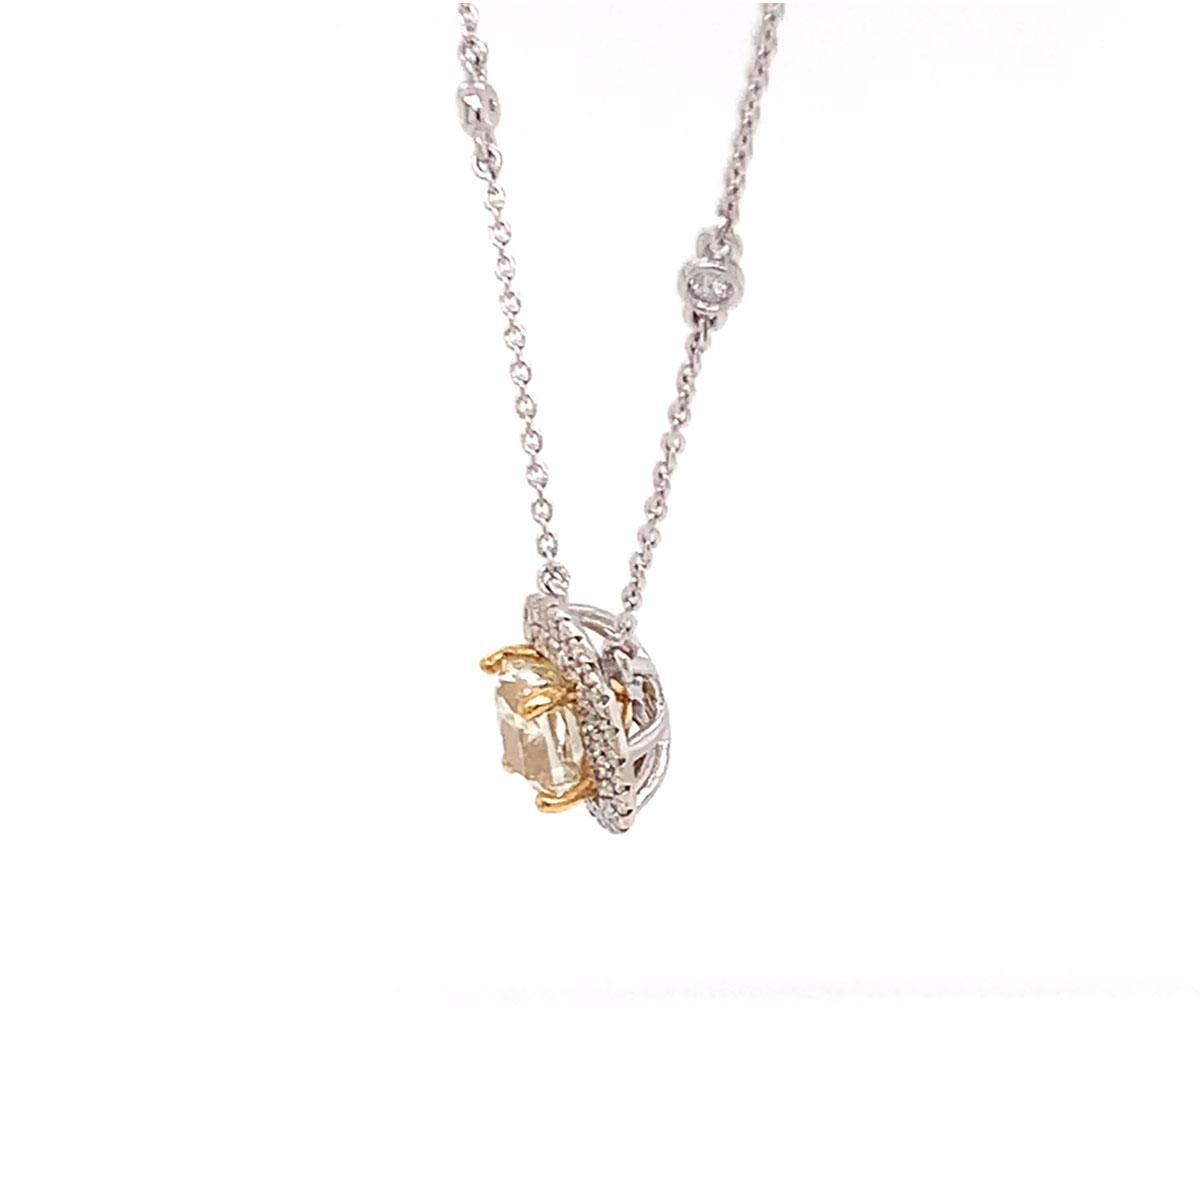 This stunning 18k White gold and 22k Yellow gold necklace feature a 1.50 Carat Yellow Square cushion-shaped diamond encircled by two rows of brilliant round diamonds on a 1 mm station chain containing fourteen (14) round brilliant diamonds bezel